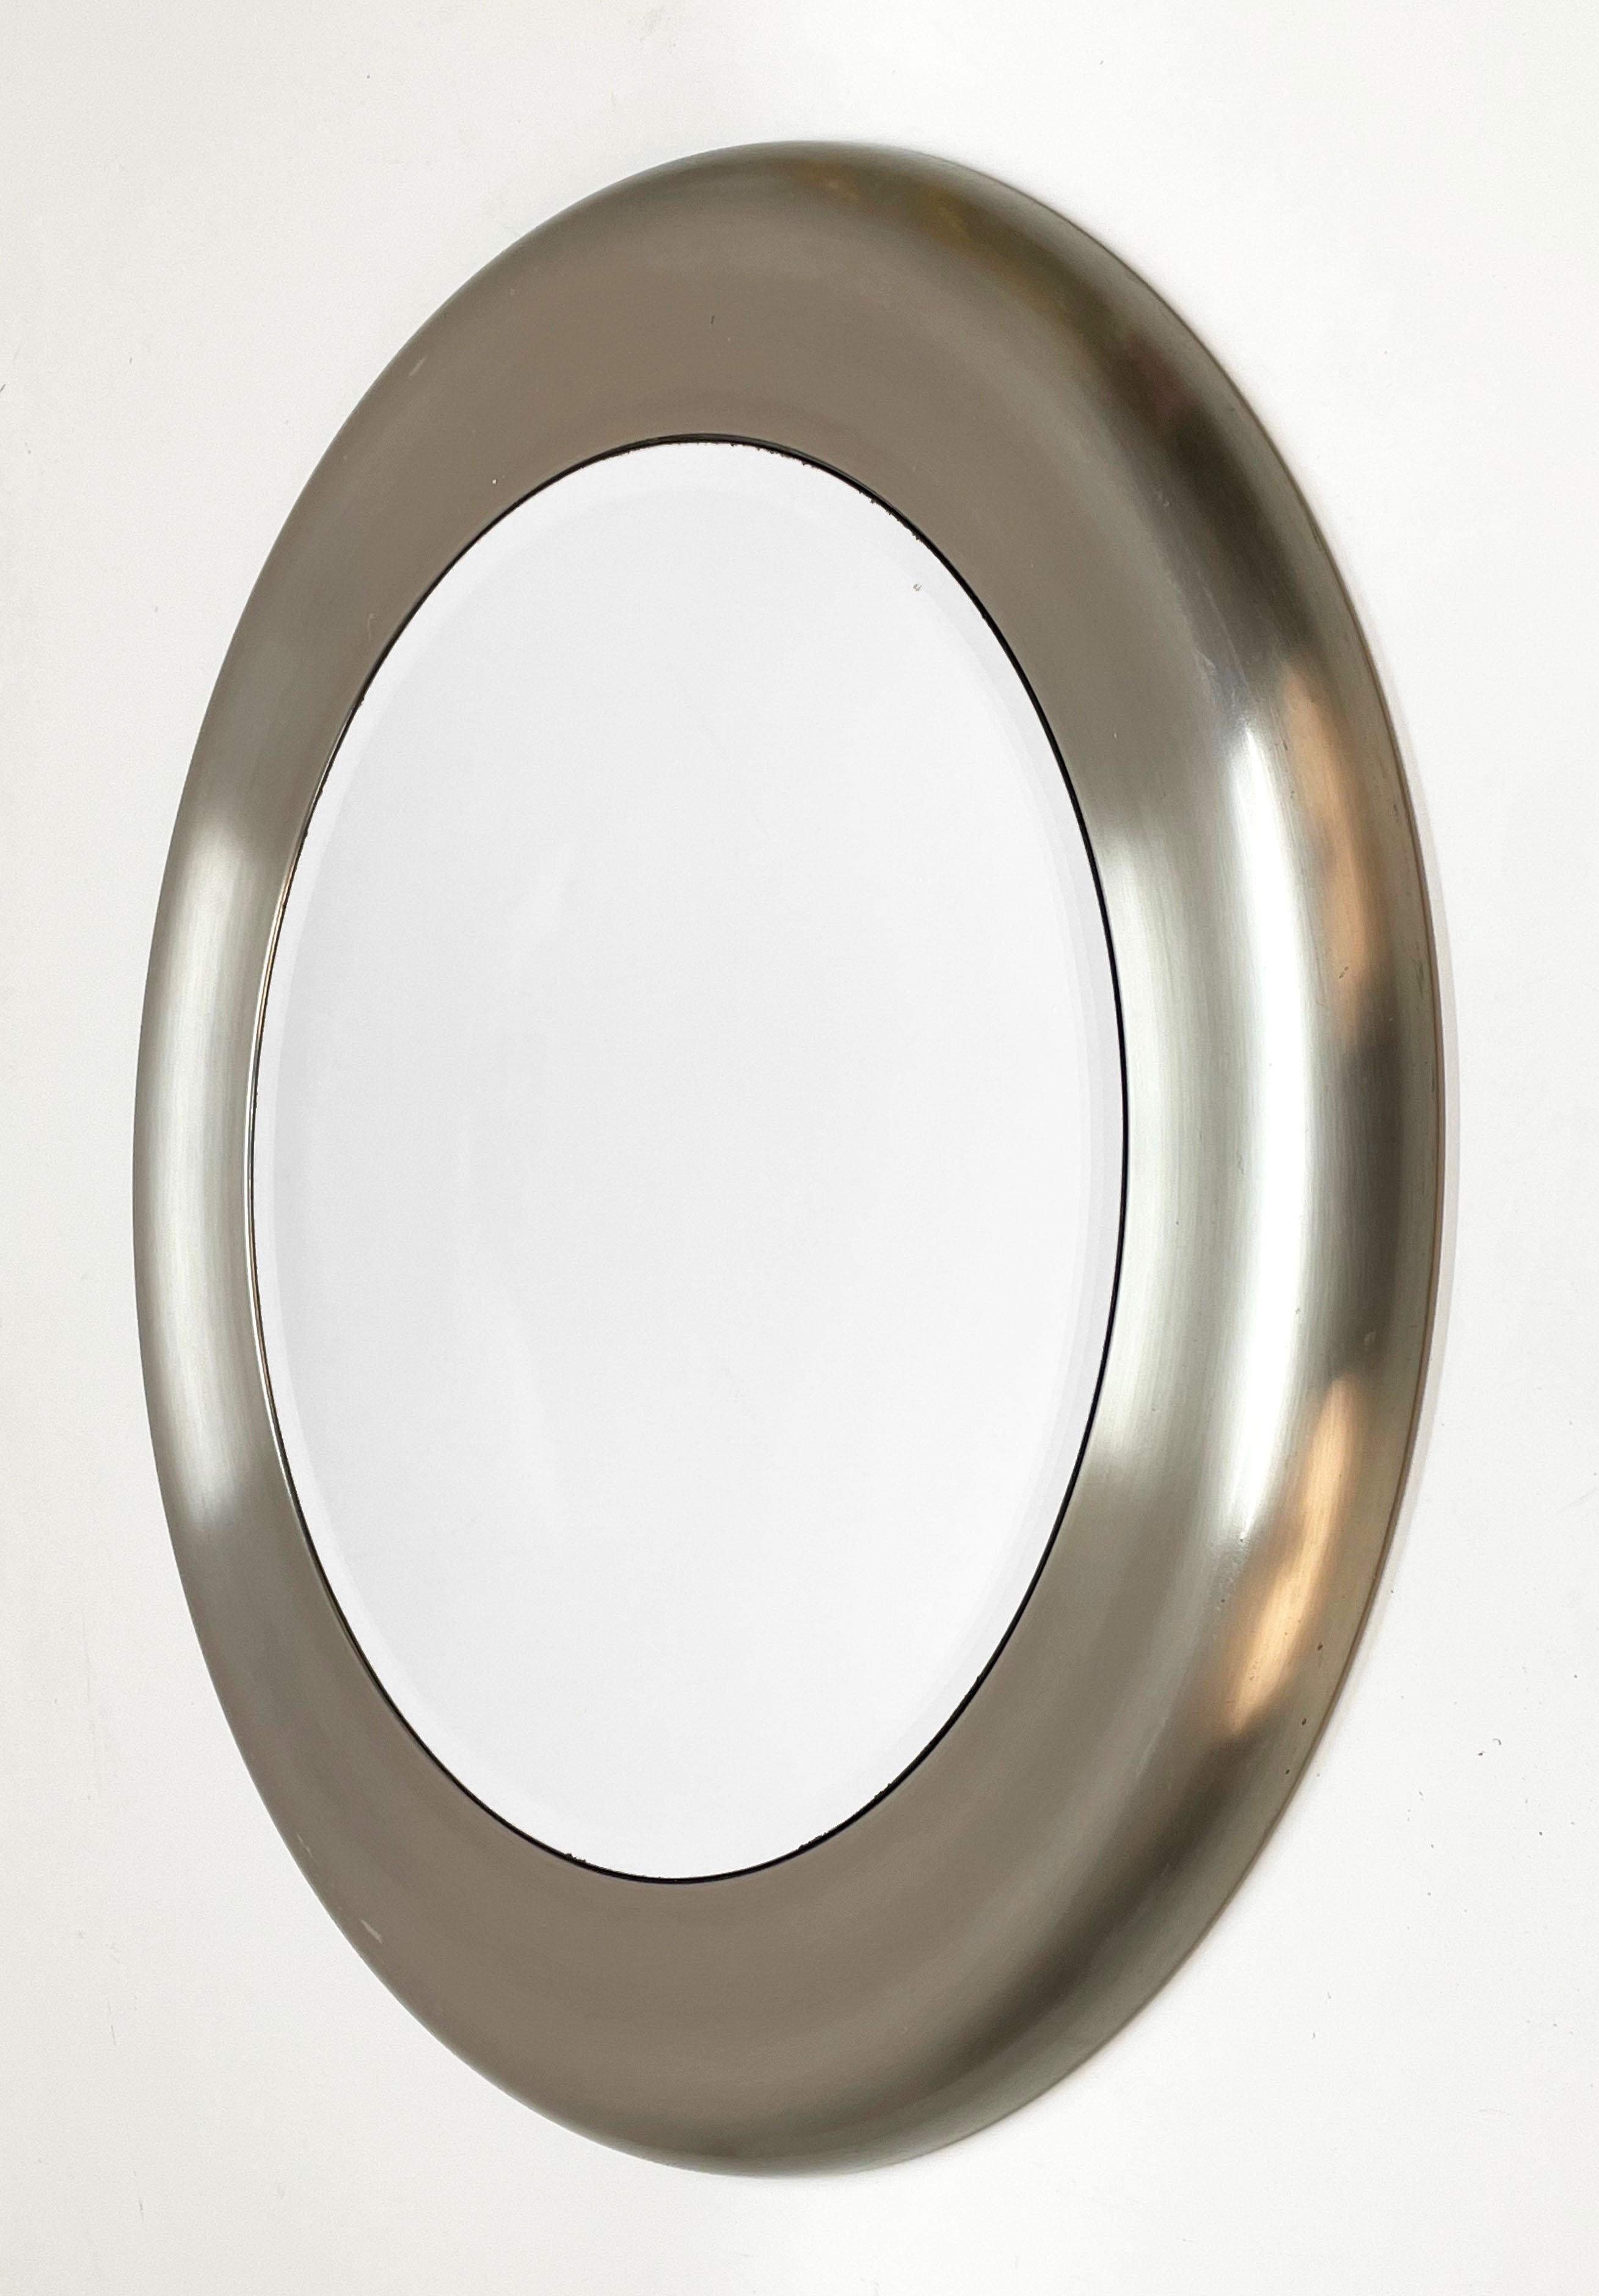 Midcentury Reggiani Italian Round Steel and Bevelled Wall Mirror, 1960s For Sale 4